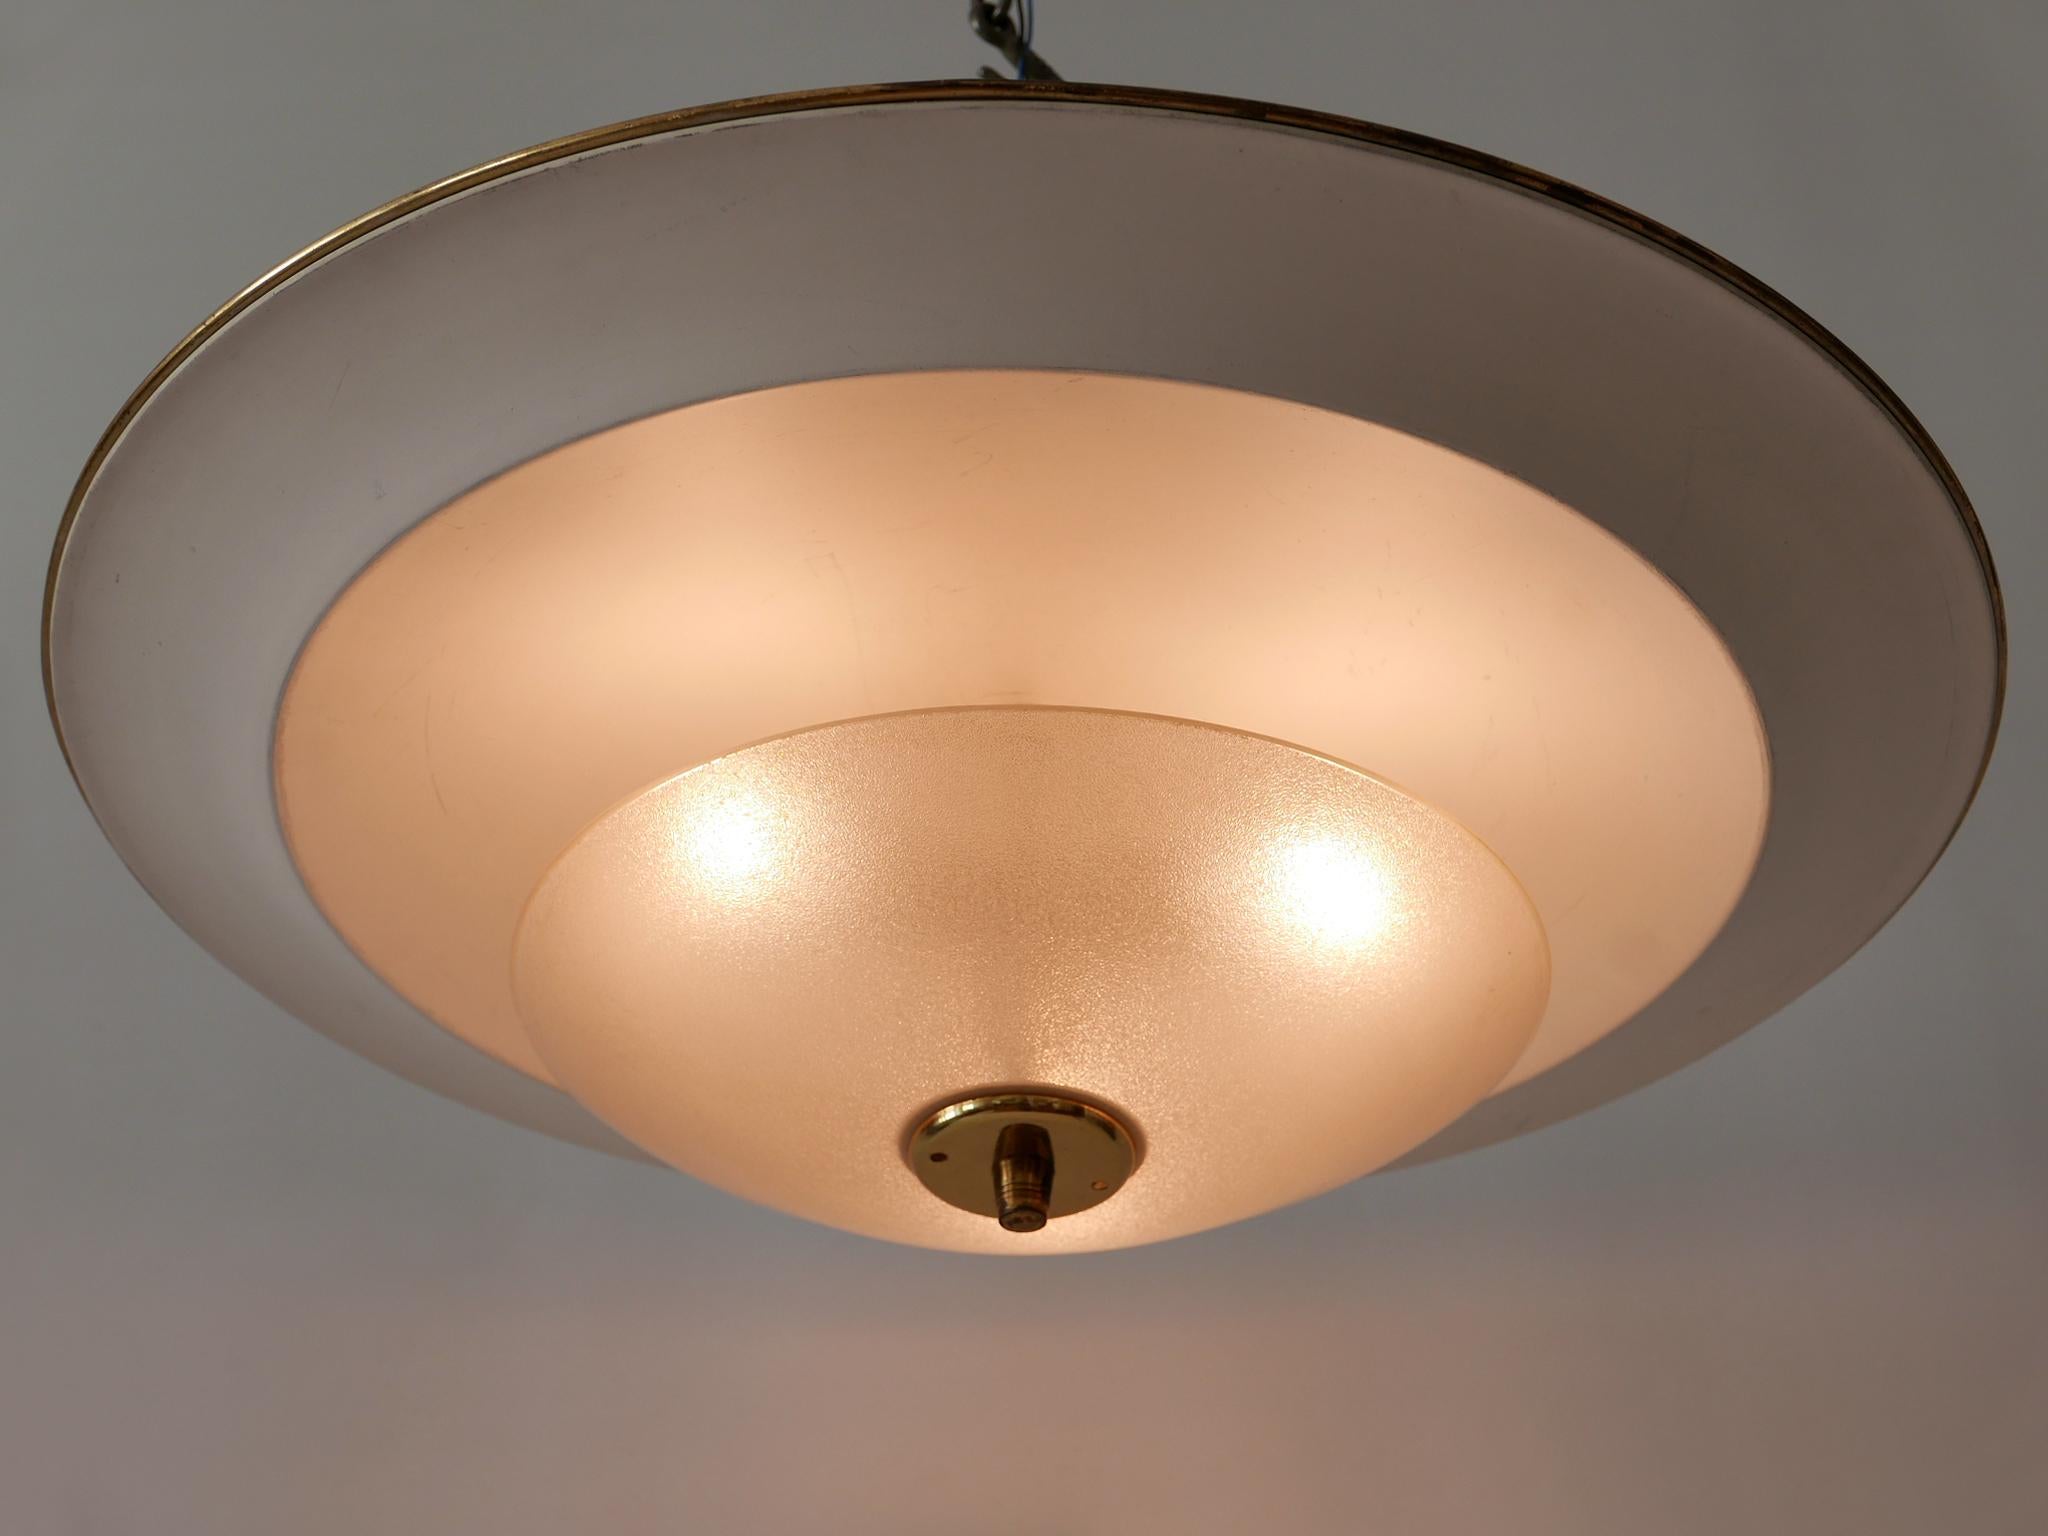 Large Mid-Century Modern 'Ufo' Ceiling Light or Pendant Lamp Germany 1950s № 1 For Sale 10